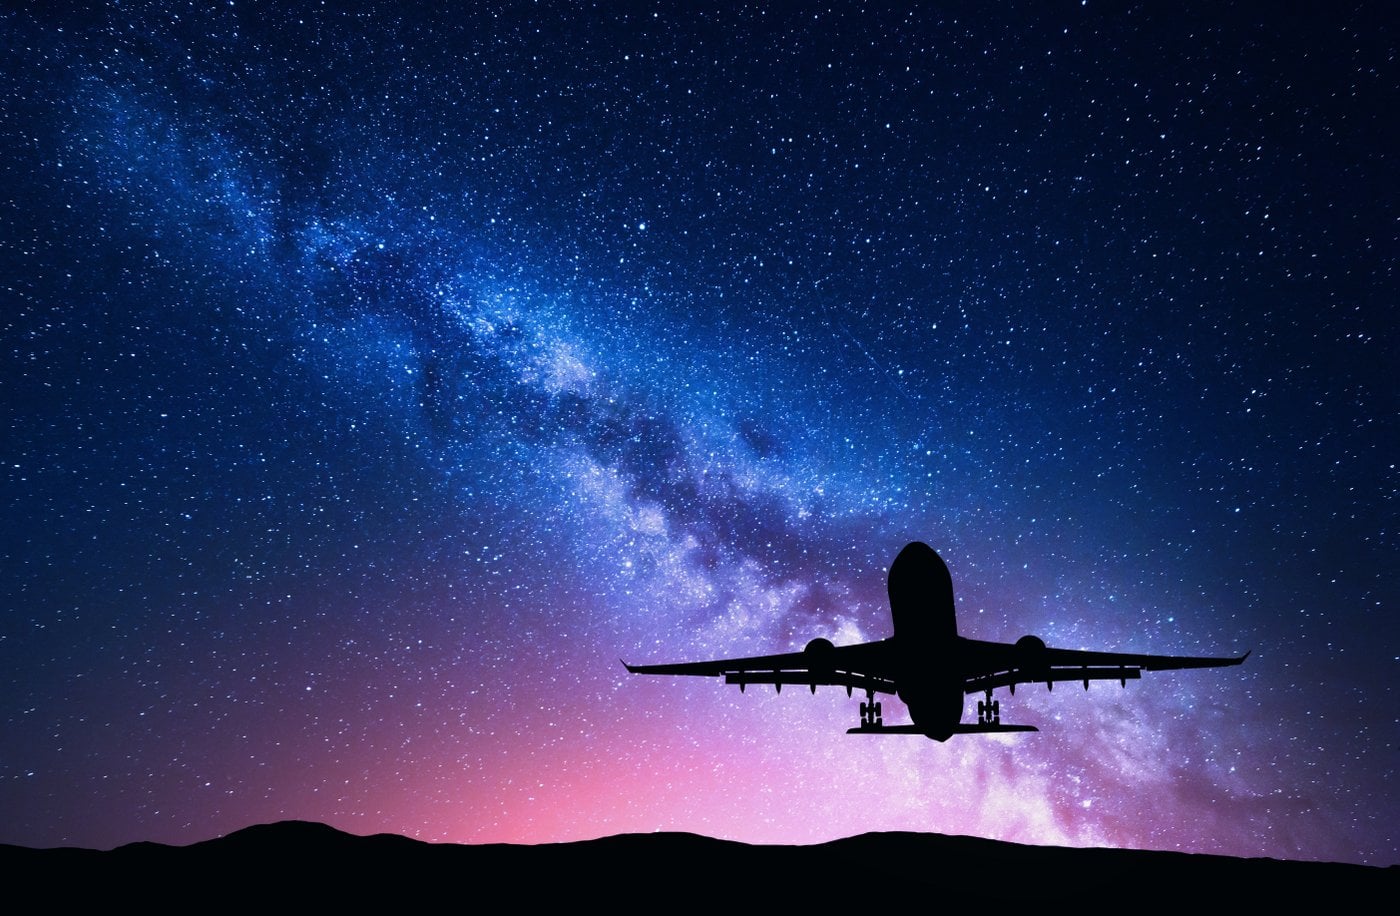 Airplane taking off against a starry background